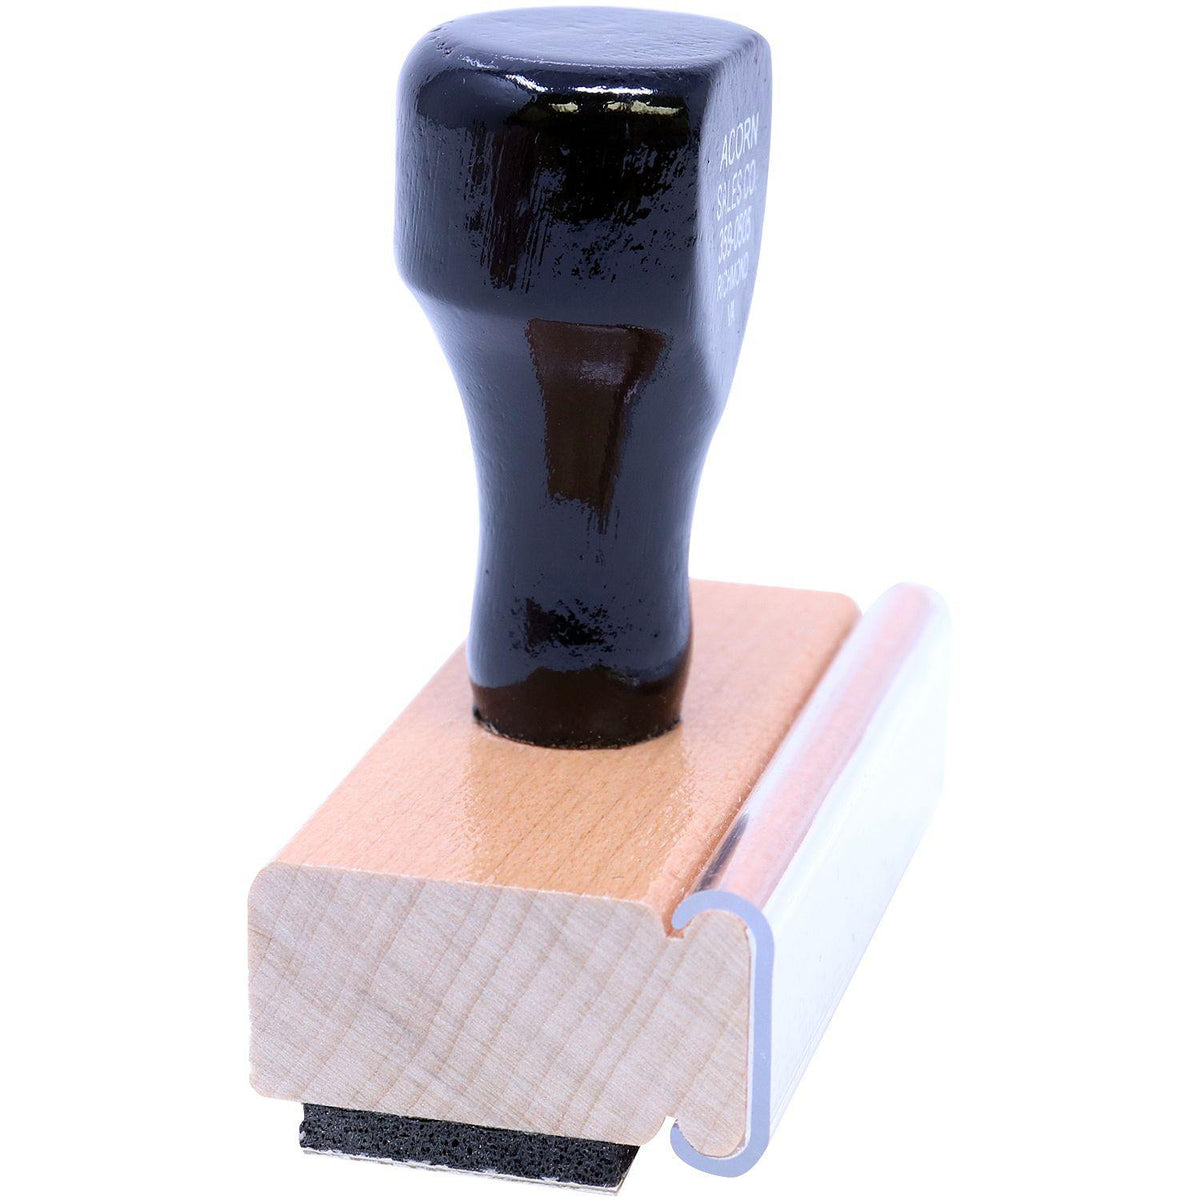 Side View of Large Restricted Area Rubber Stamp at an Angle